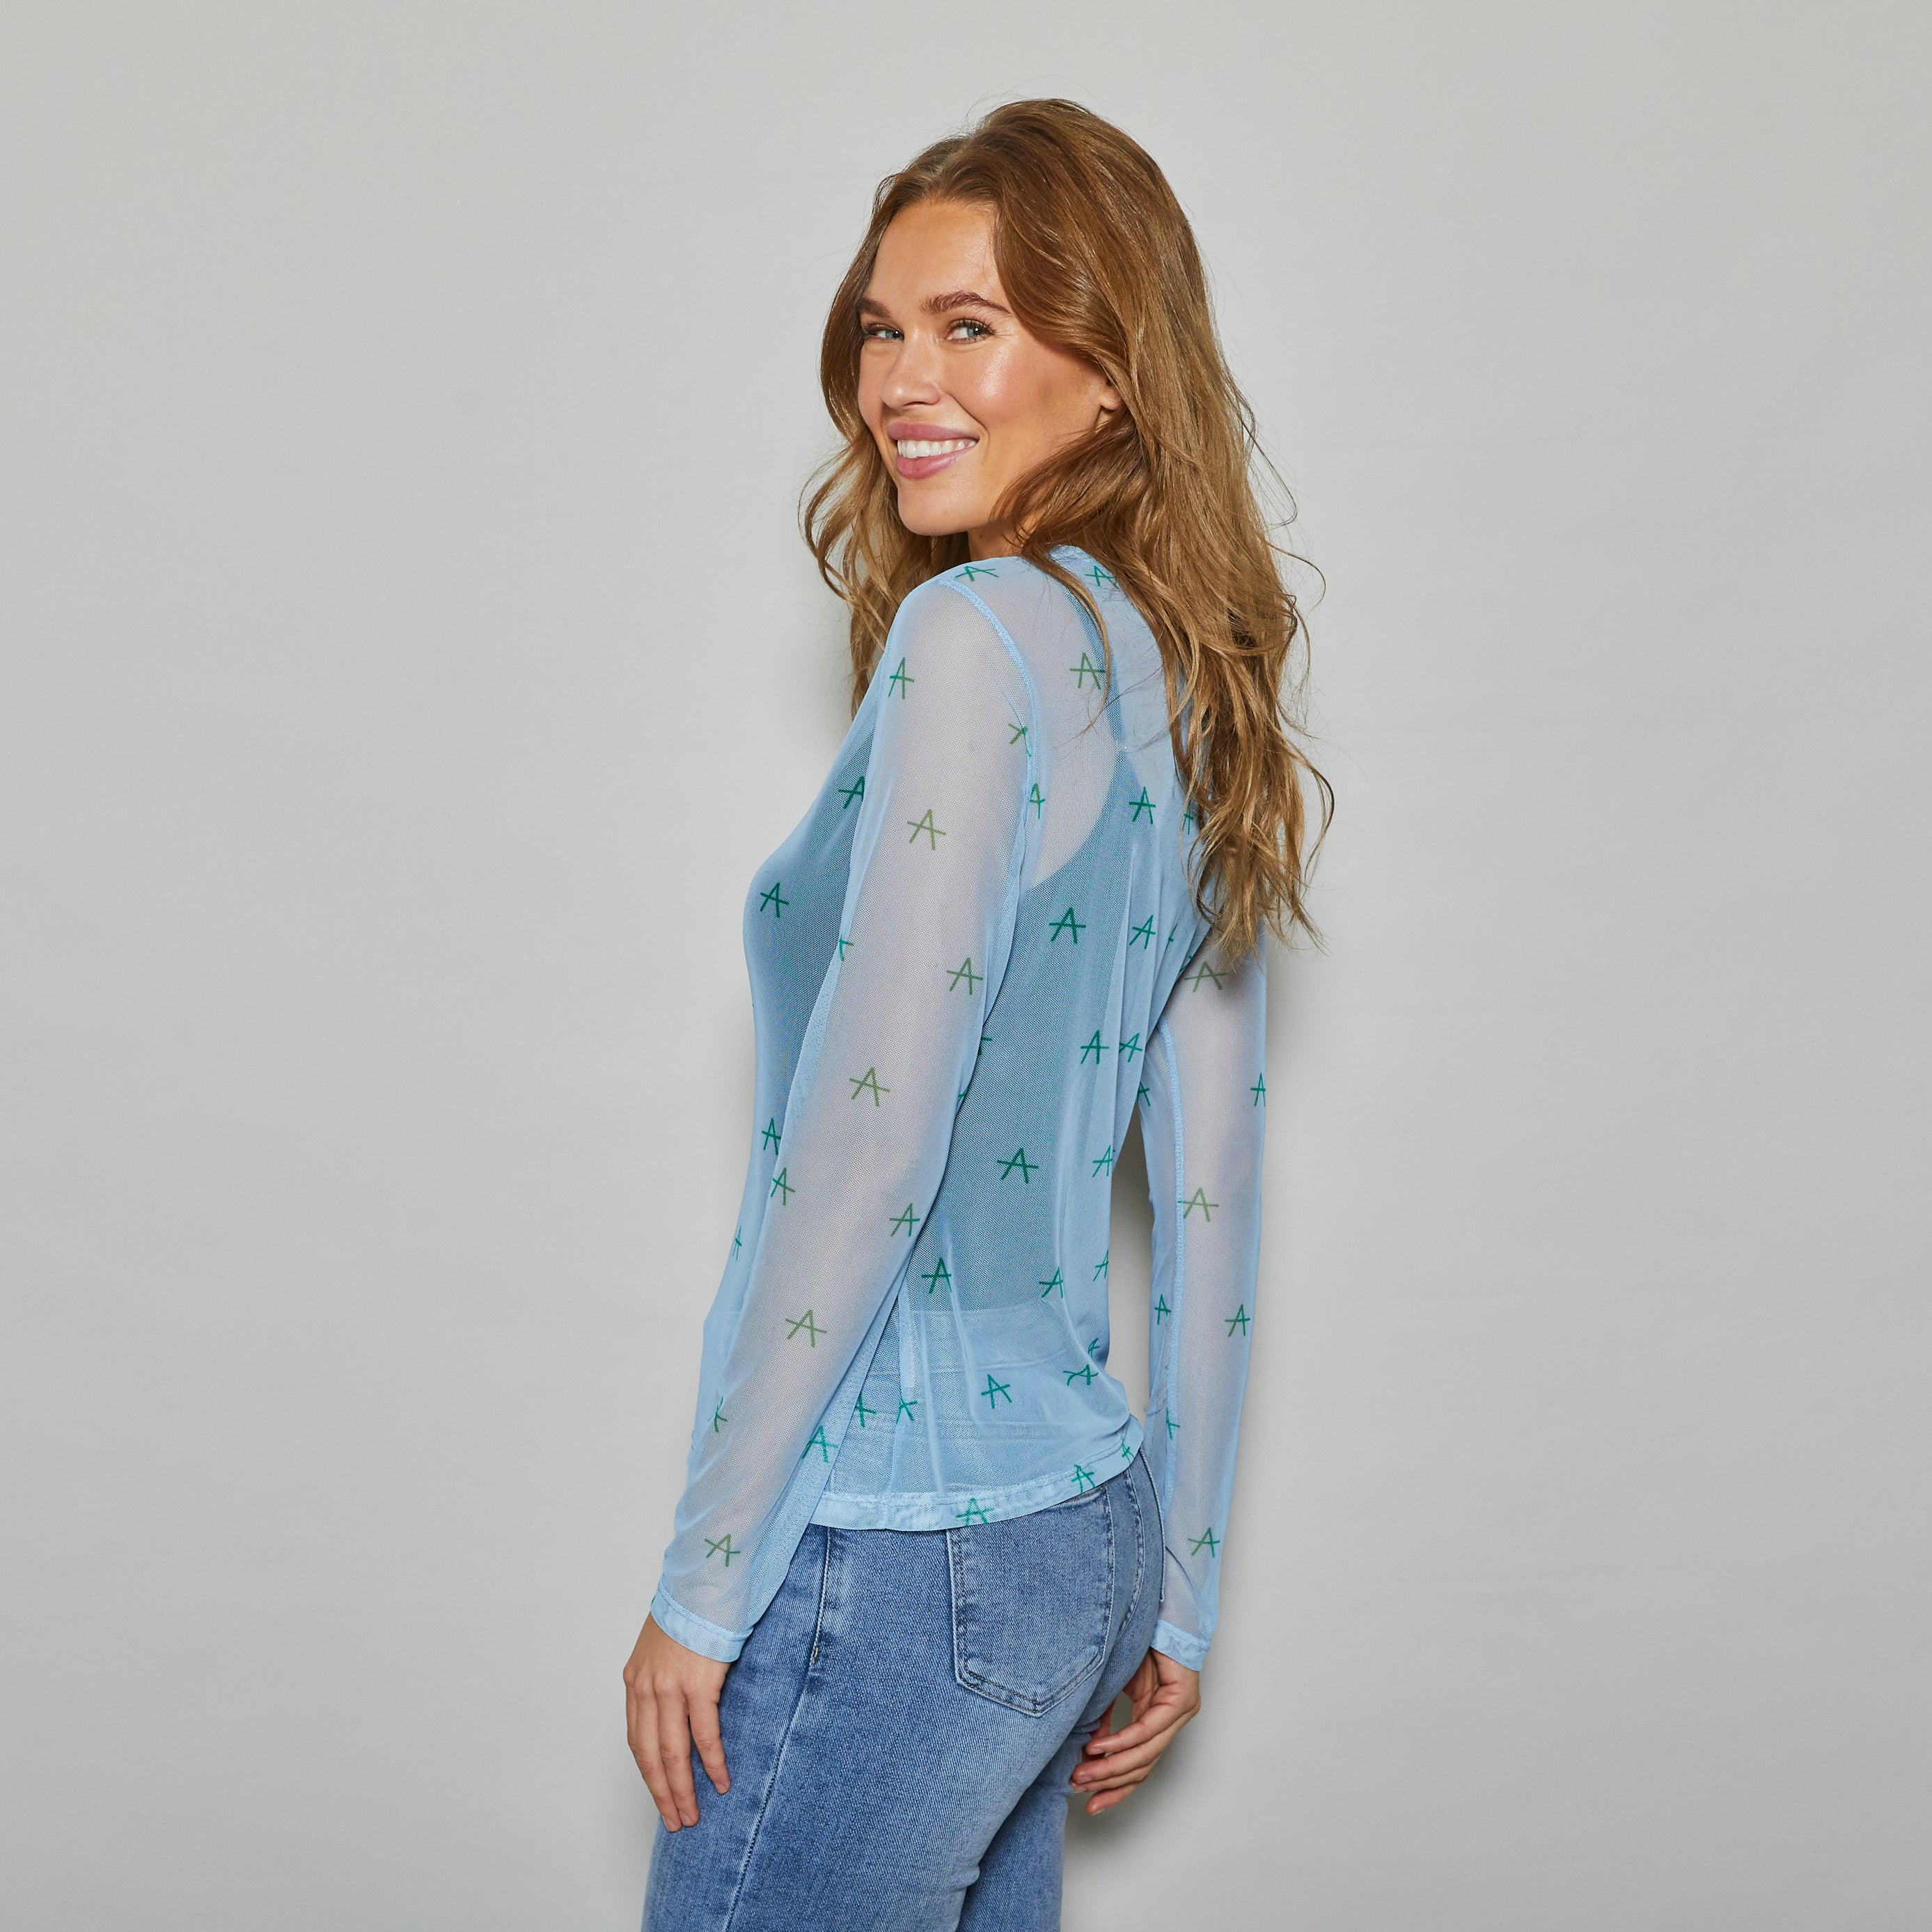 ALLWEEK Fro mesh blouse Blouse Light blue with green A print